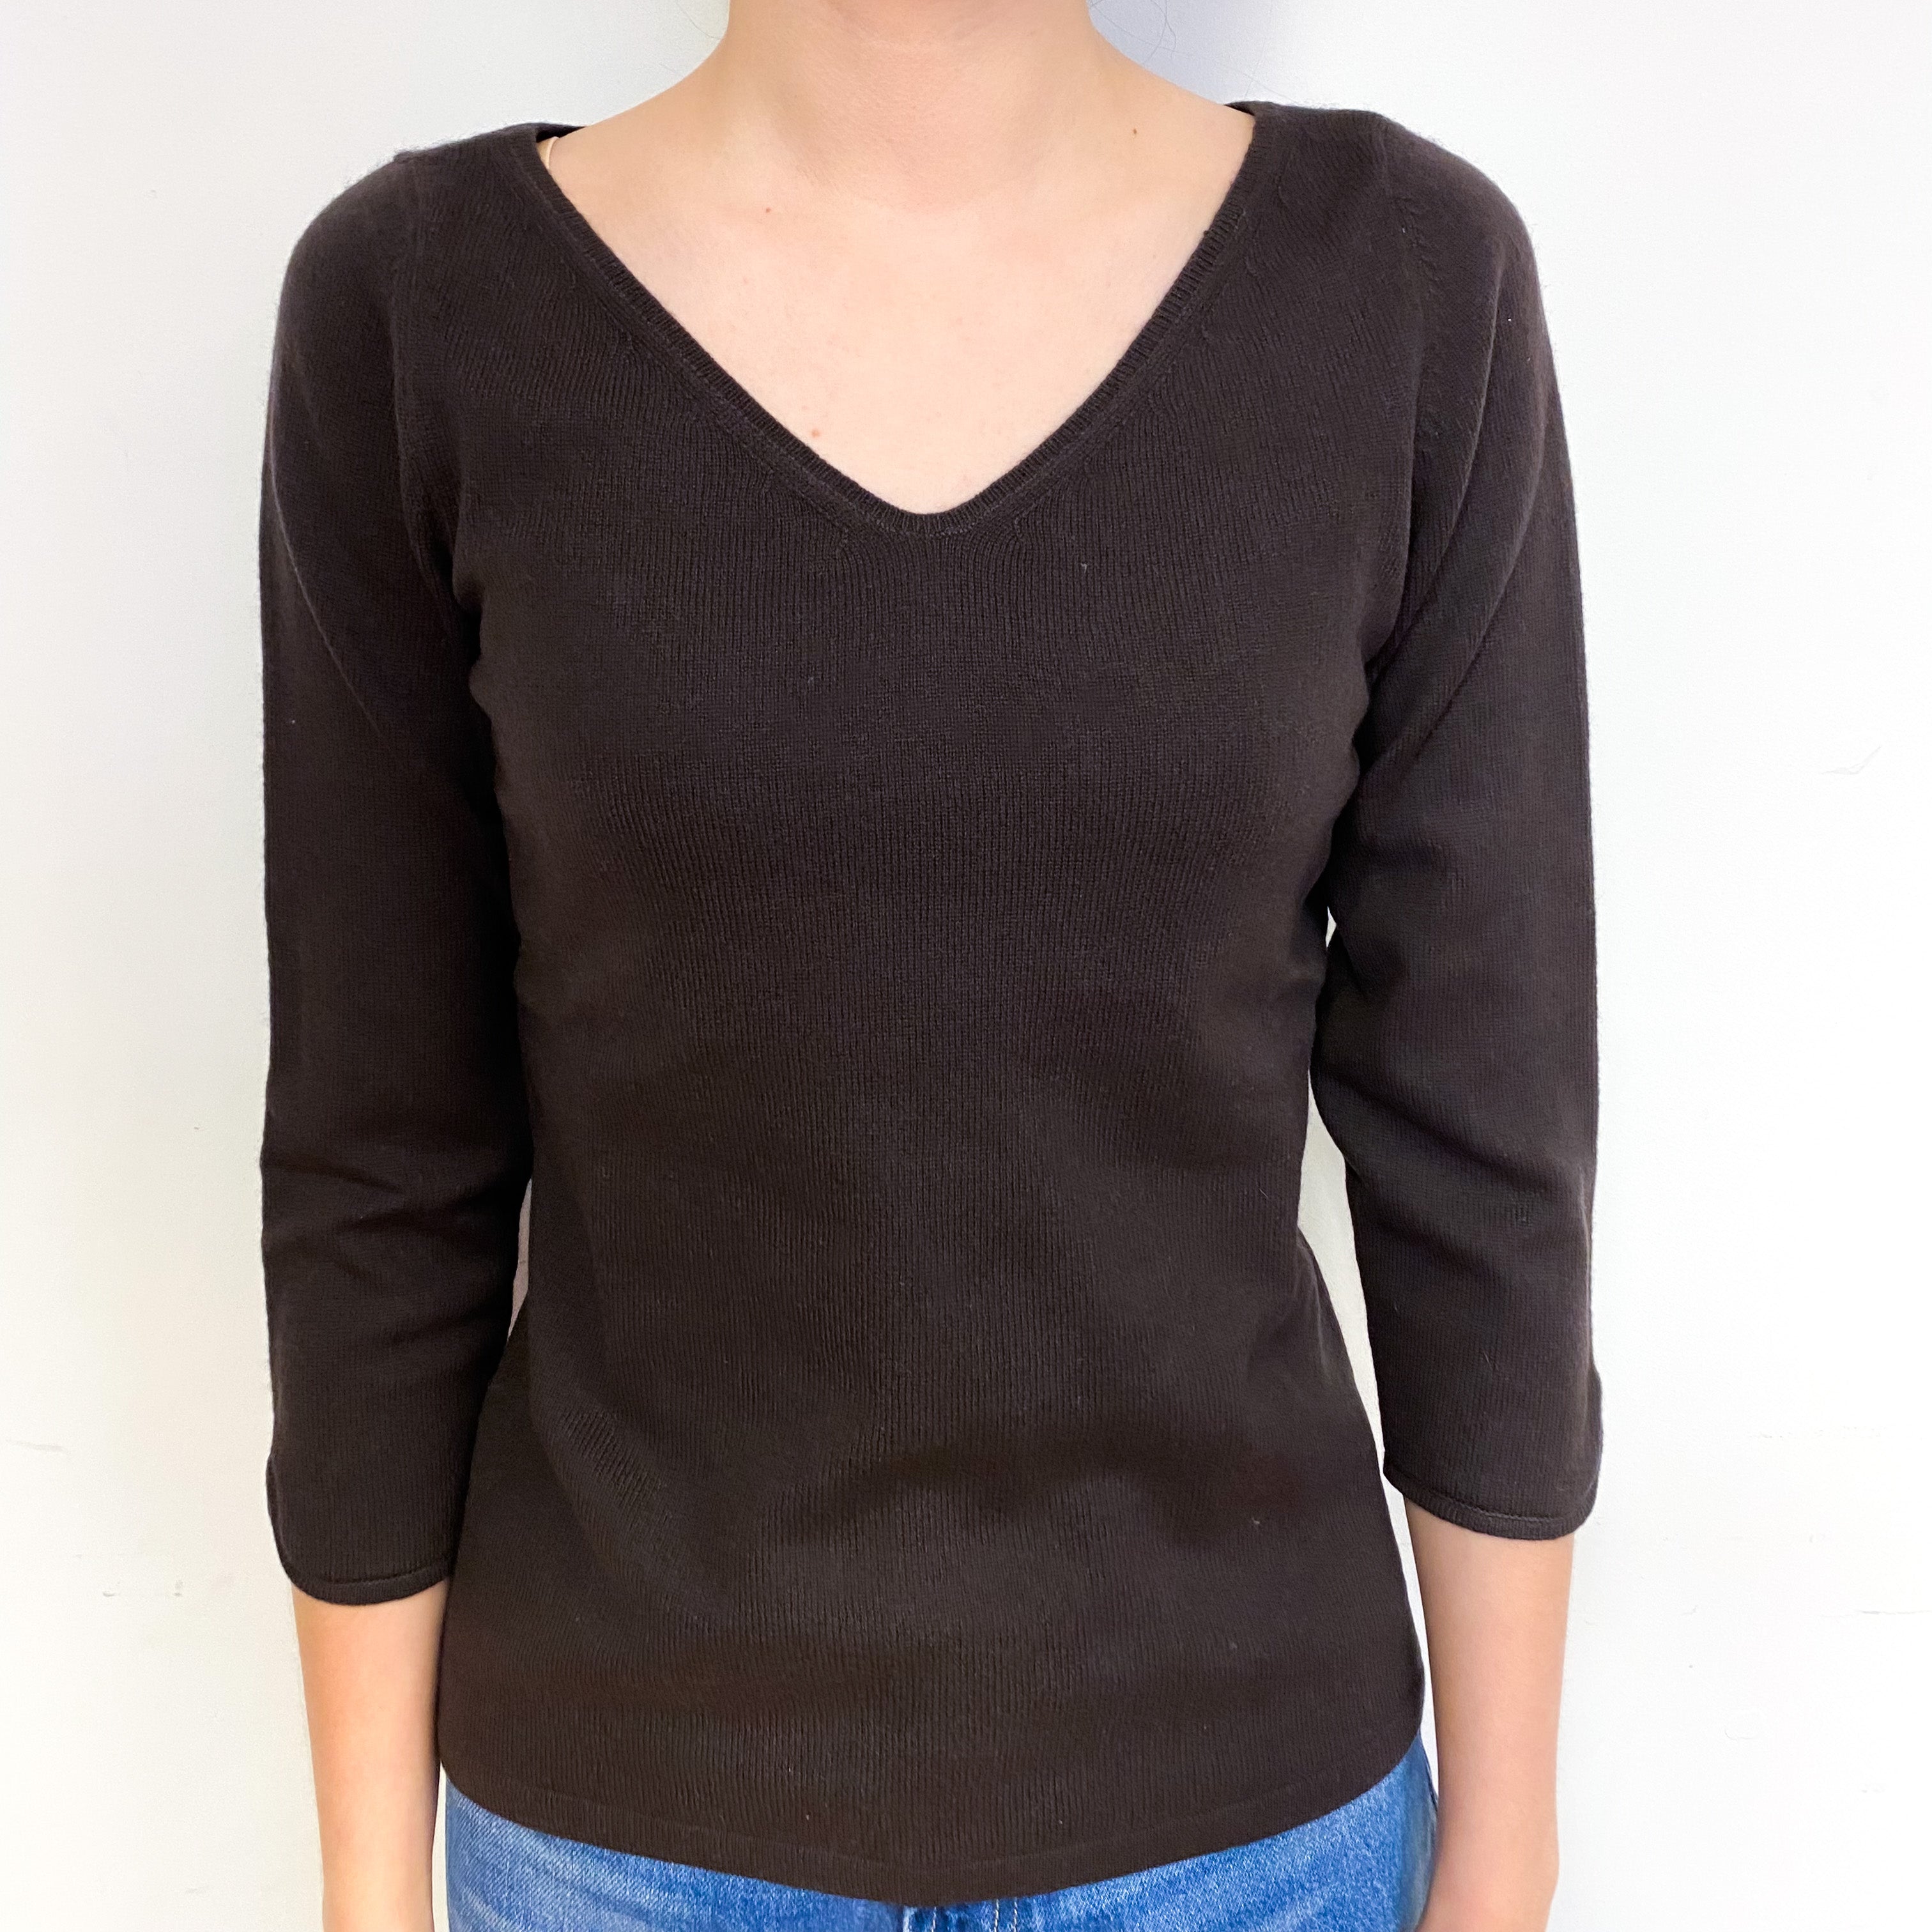 Chocolate Brown 3/4 Sleeve Cashmere V-Neck Jumper Extra Small